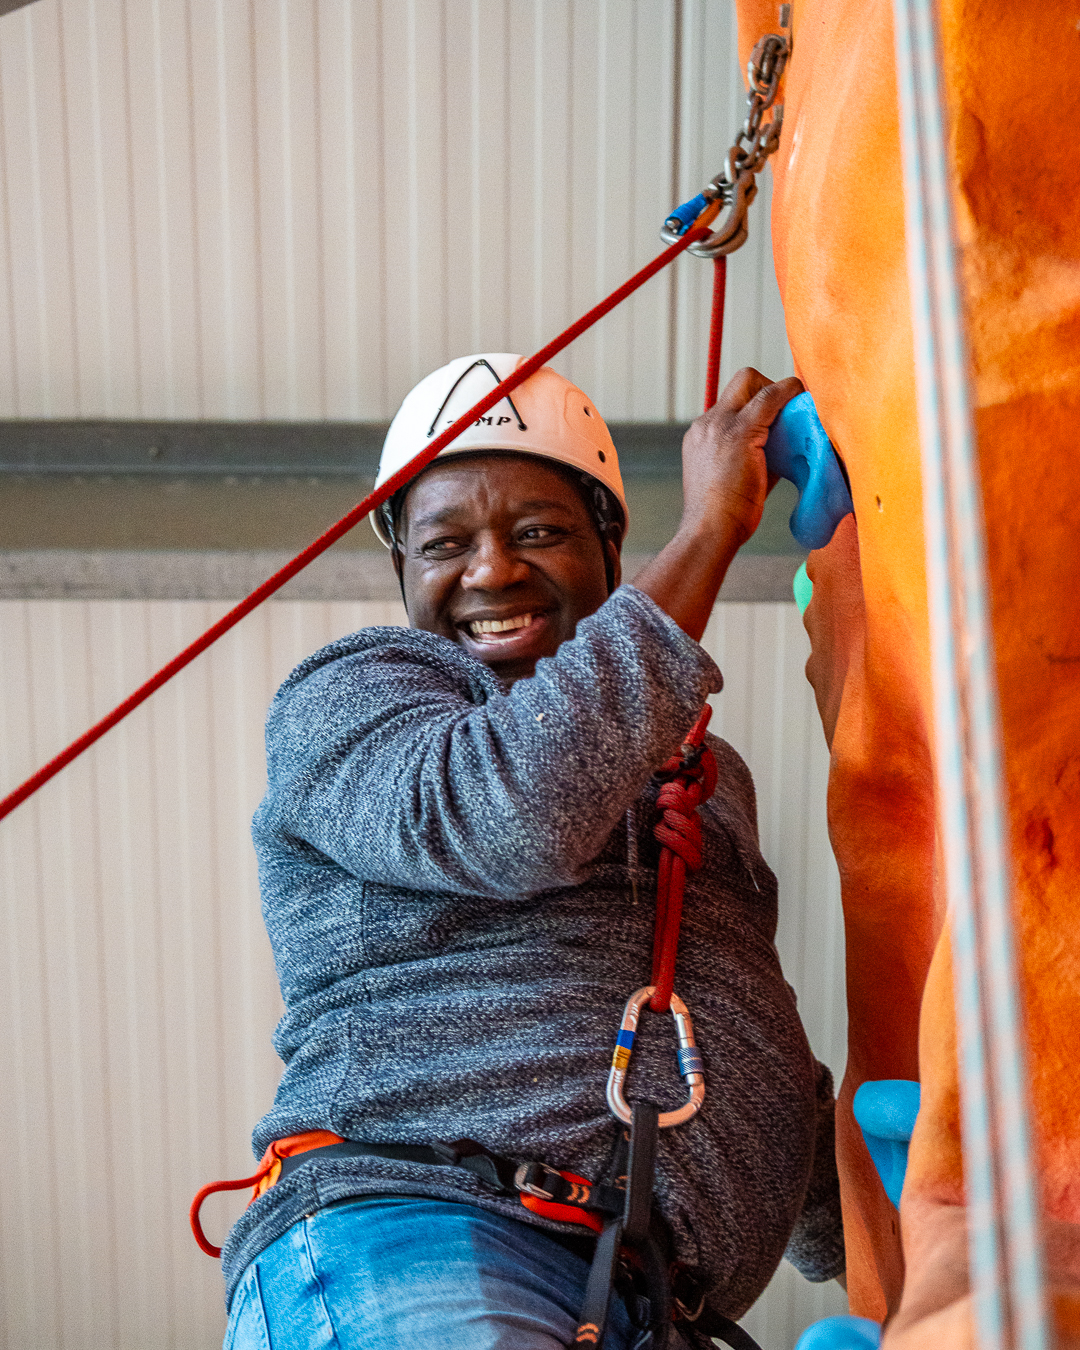 A man is holding a blue hold in an orange indoor climbing wall, with a red rope attached to his harness. He is smiling and looking down at someone out of view, with a white helmet on.